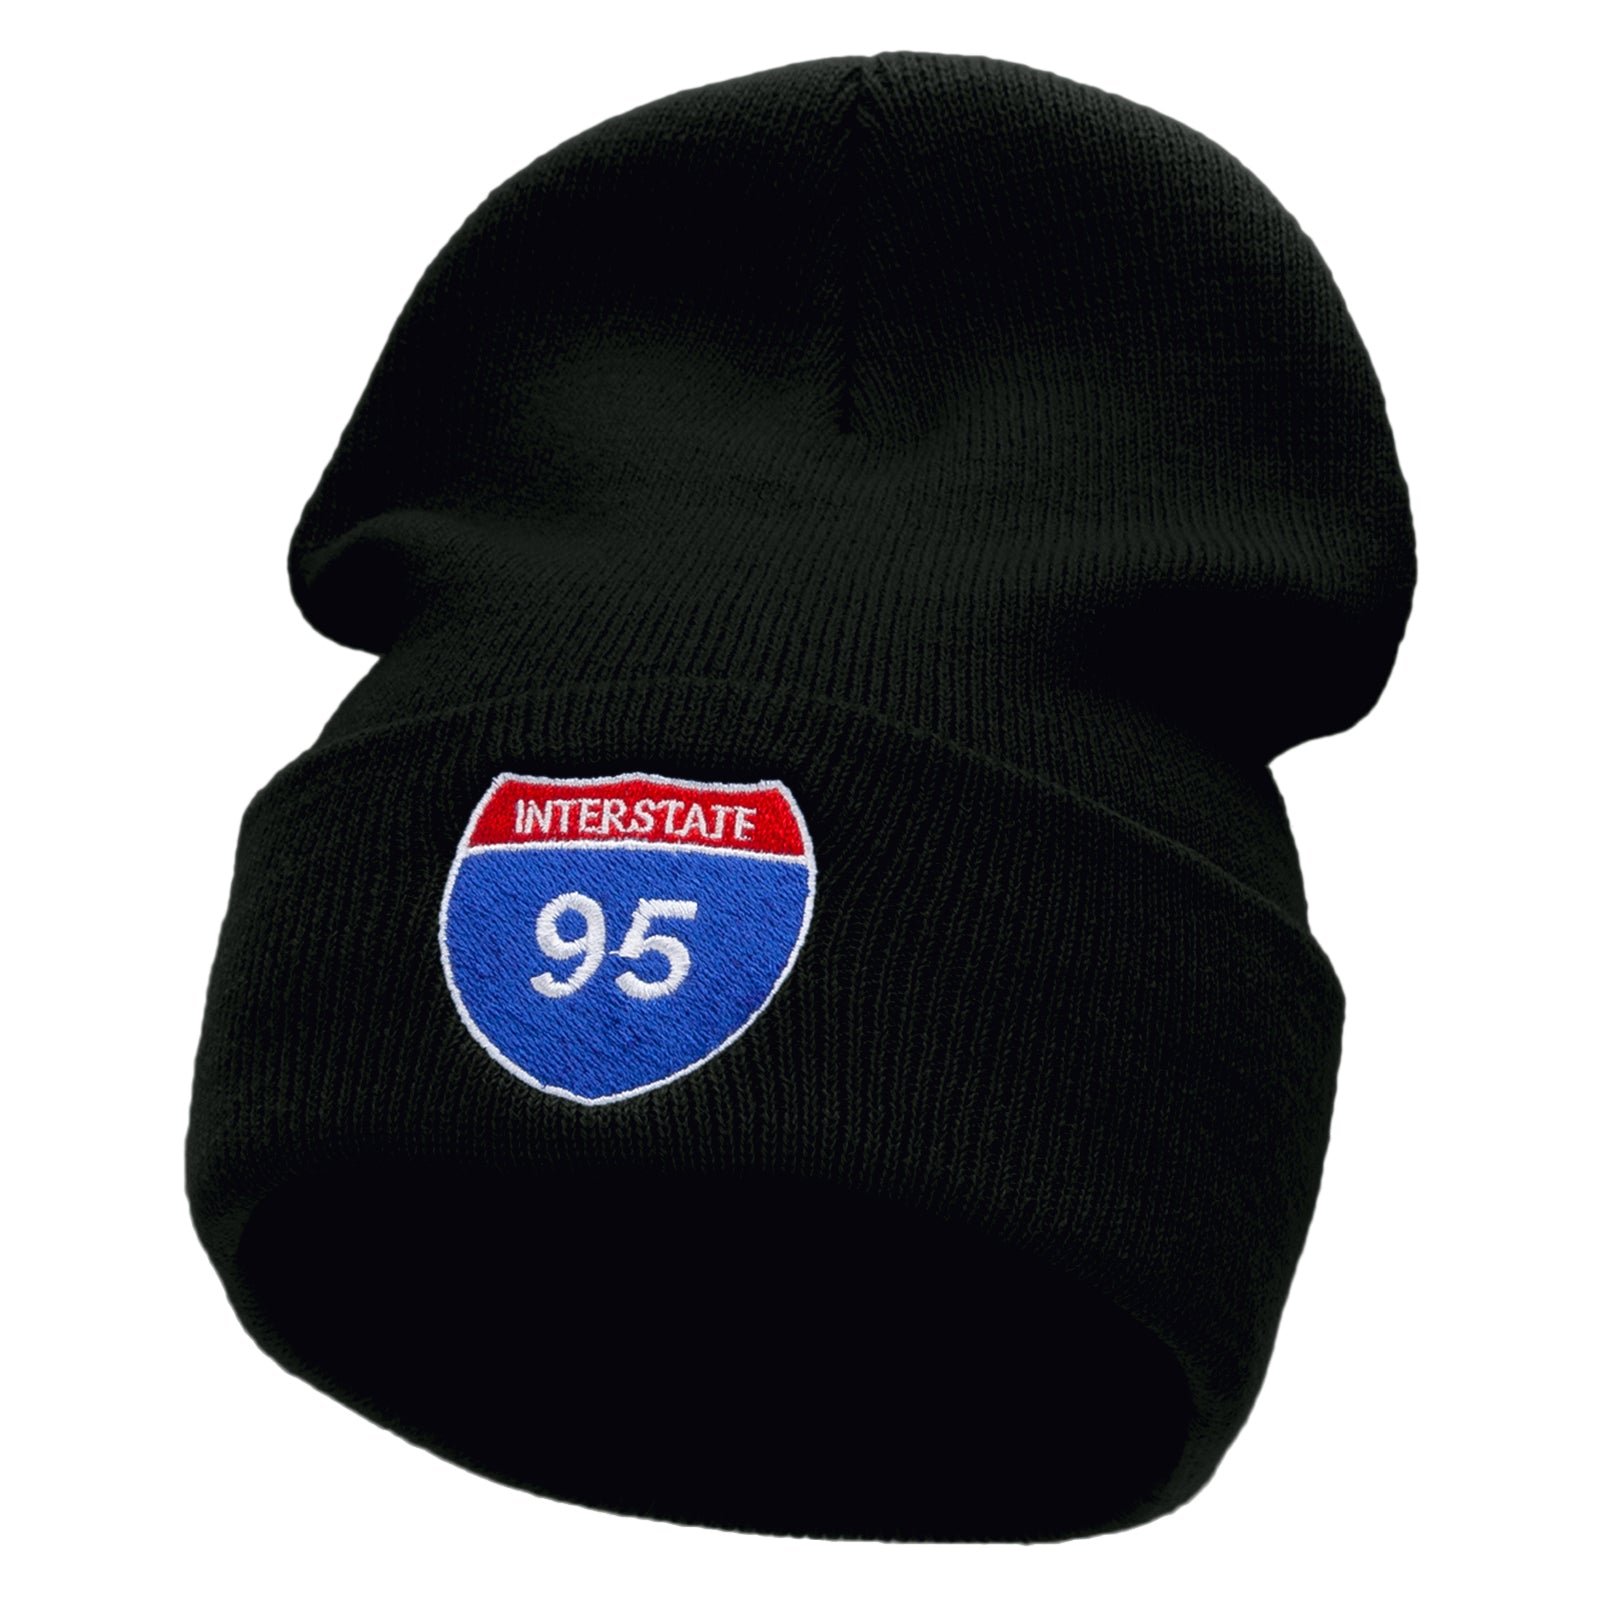 Interstate 95 Sign Embroidered 12 Inch Long Knitted Beanie - Black OSFM